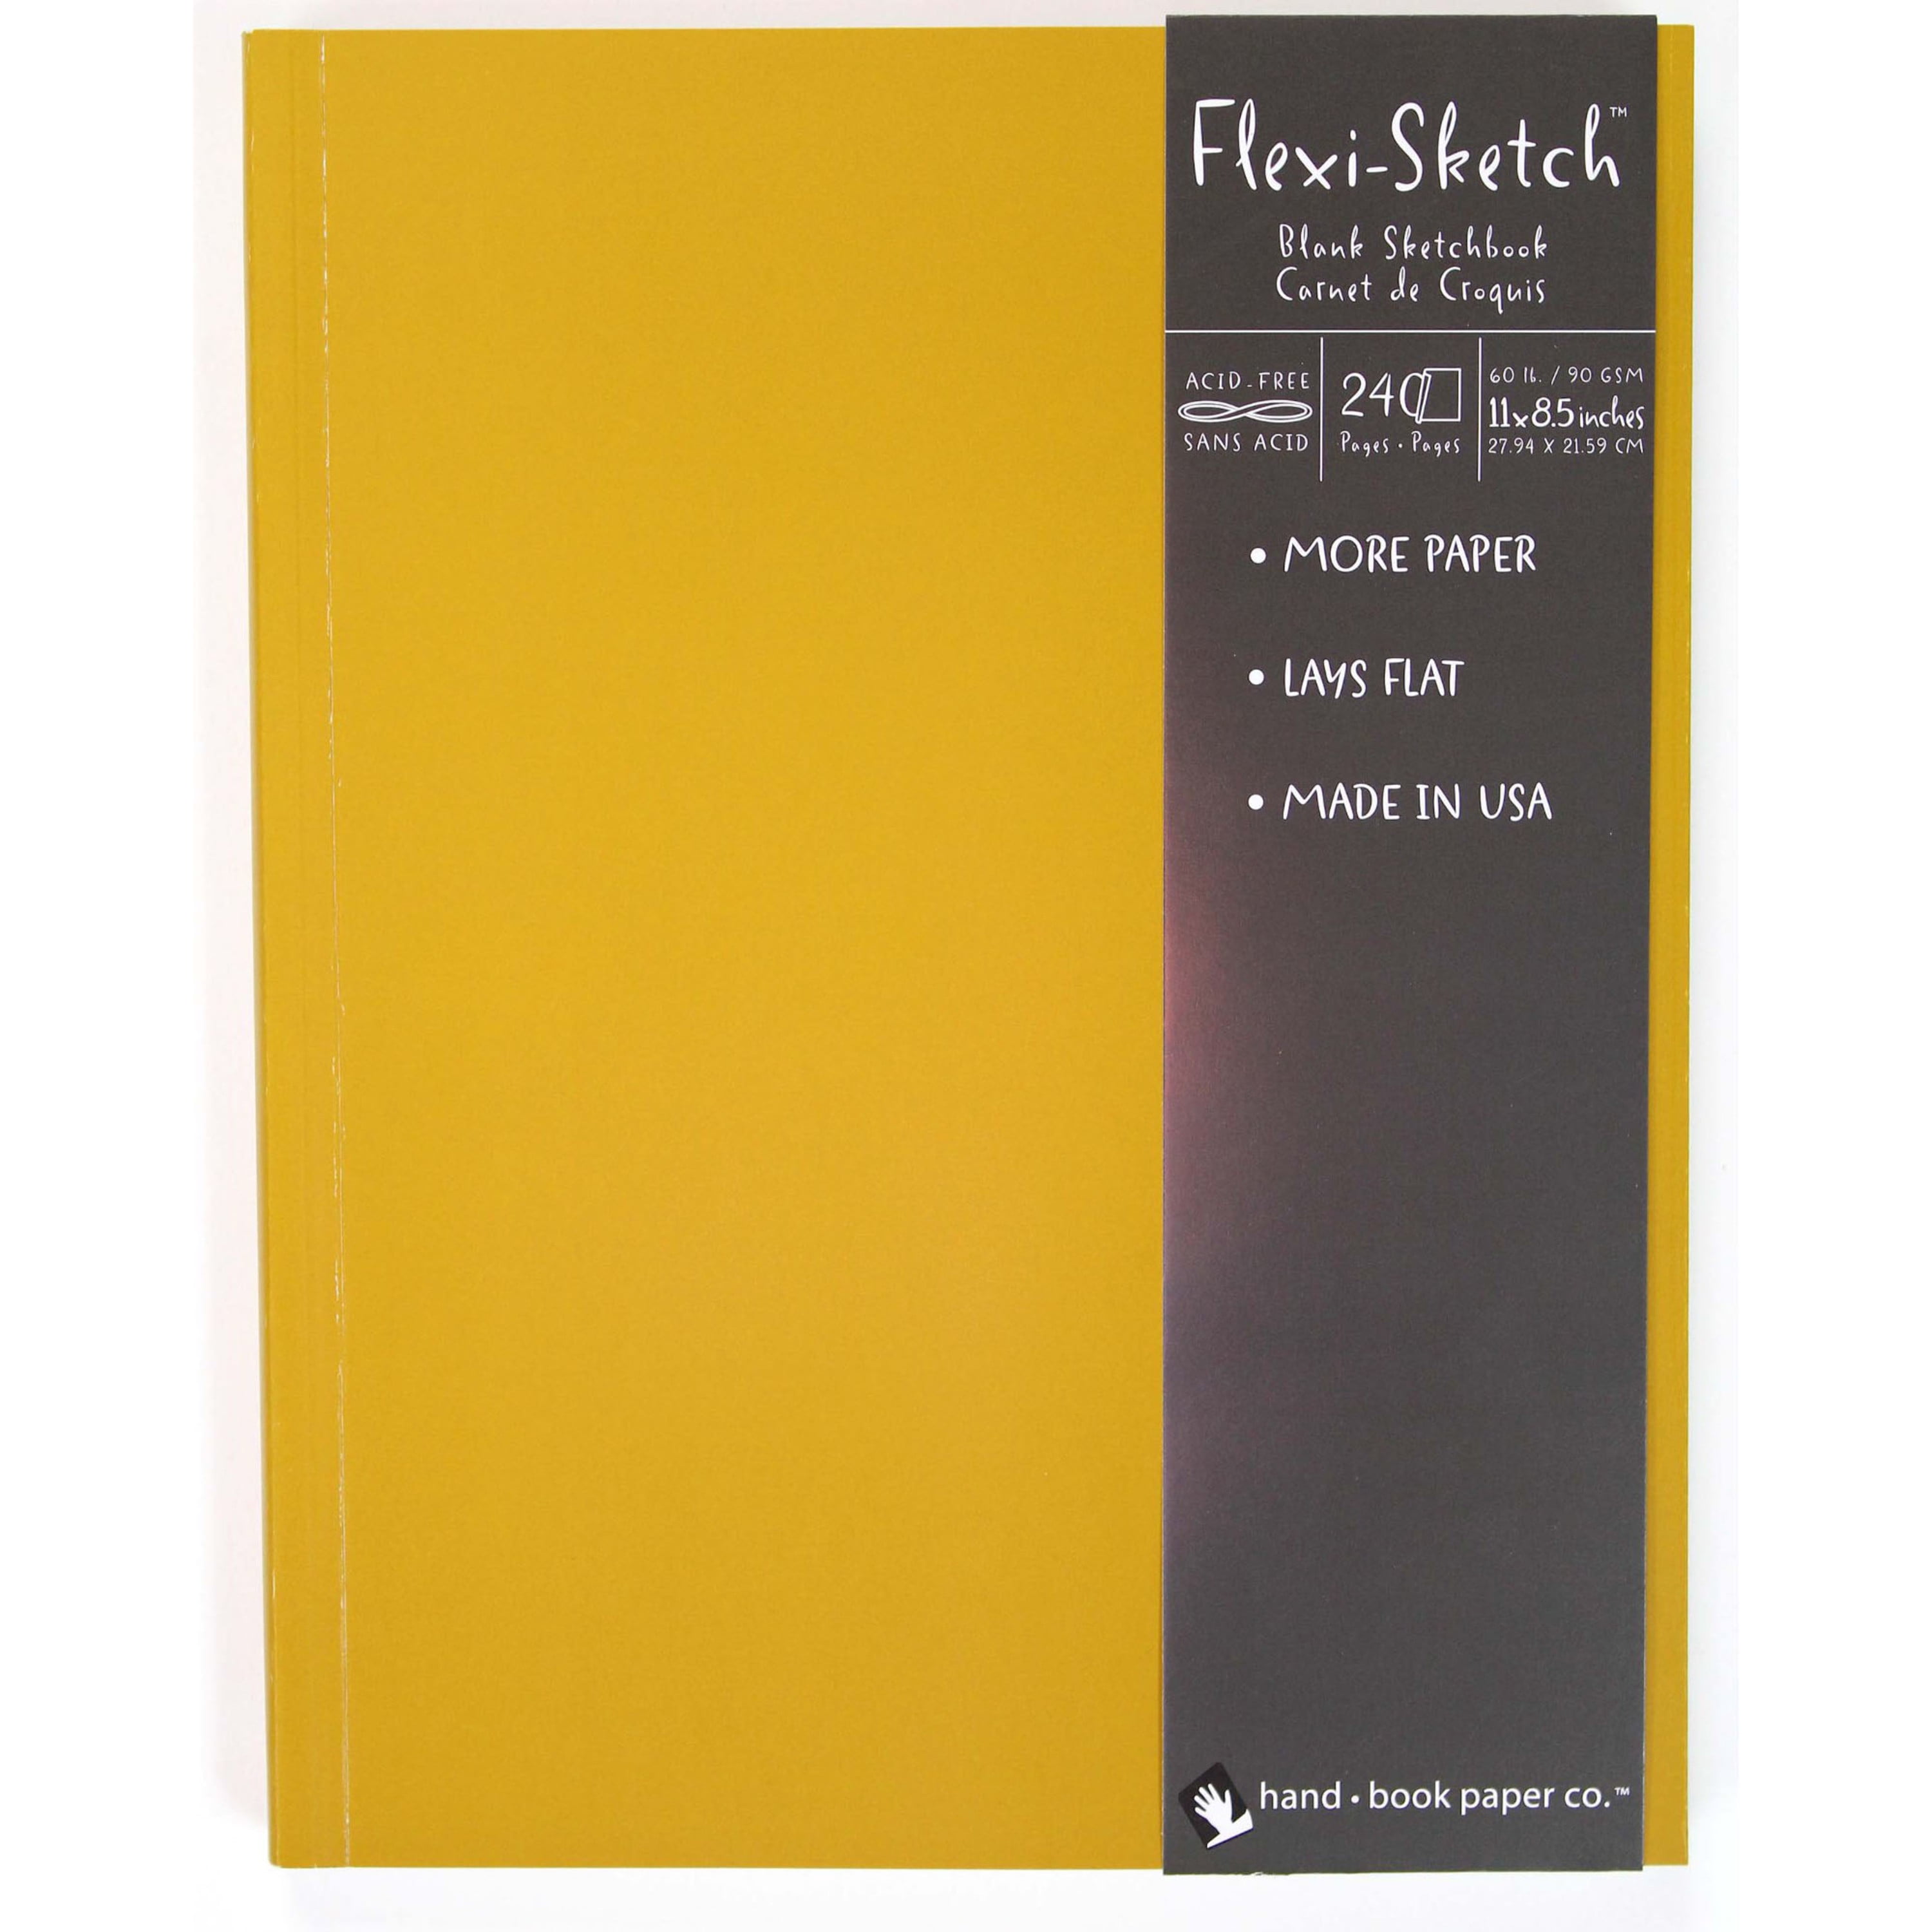 BLANK SKETCHBOOK FOR KIDS (JUMBO SIZE SKETCH BOOK FOR By Creative Learning  Tools 9781979524933